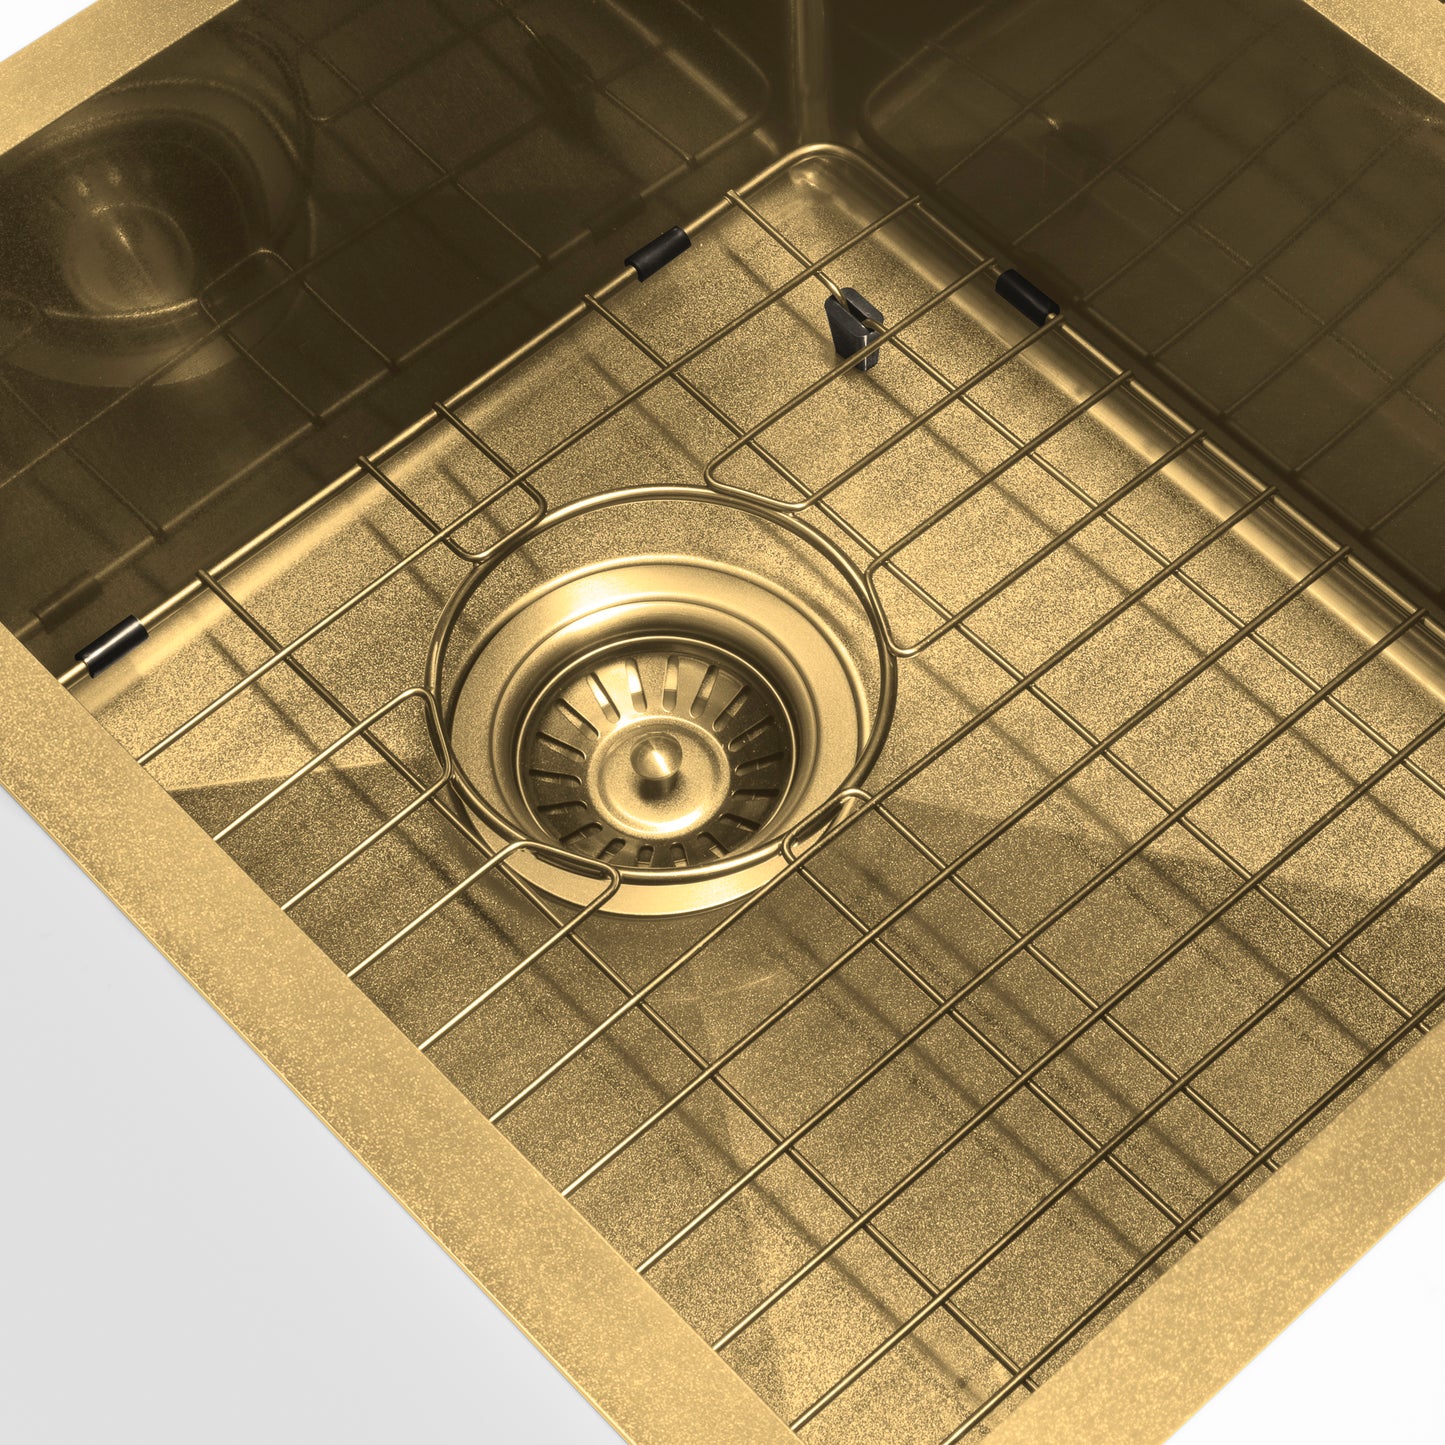 Retto 550mm x 450mm x 230mm Stainless Steel Sink | Brushed Brass (gold) |